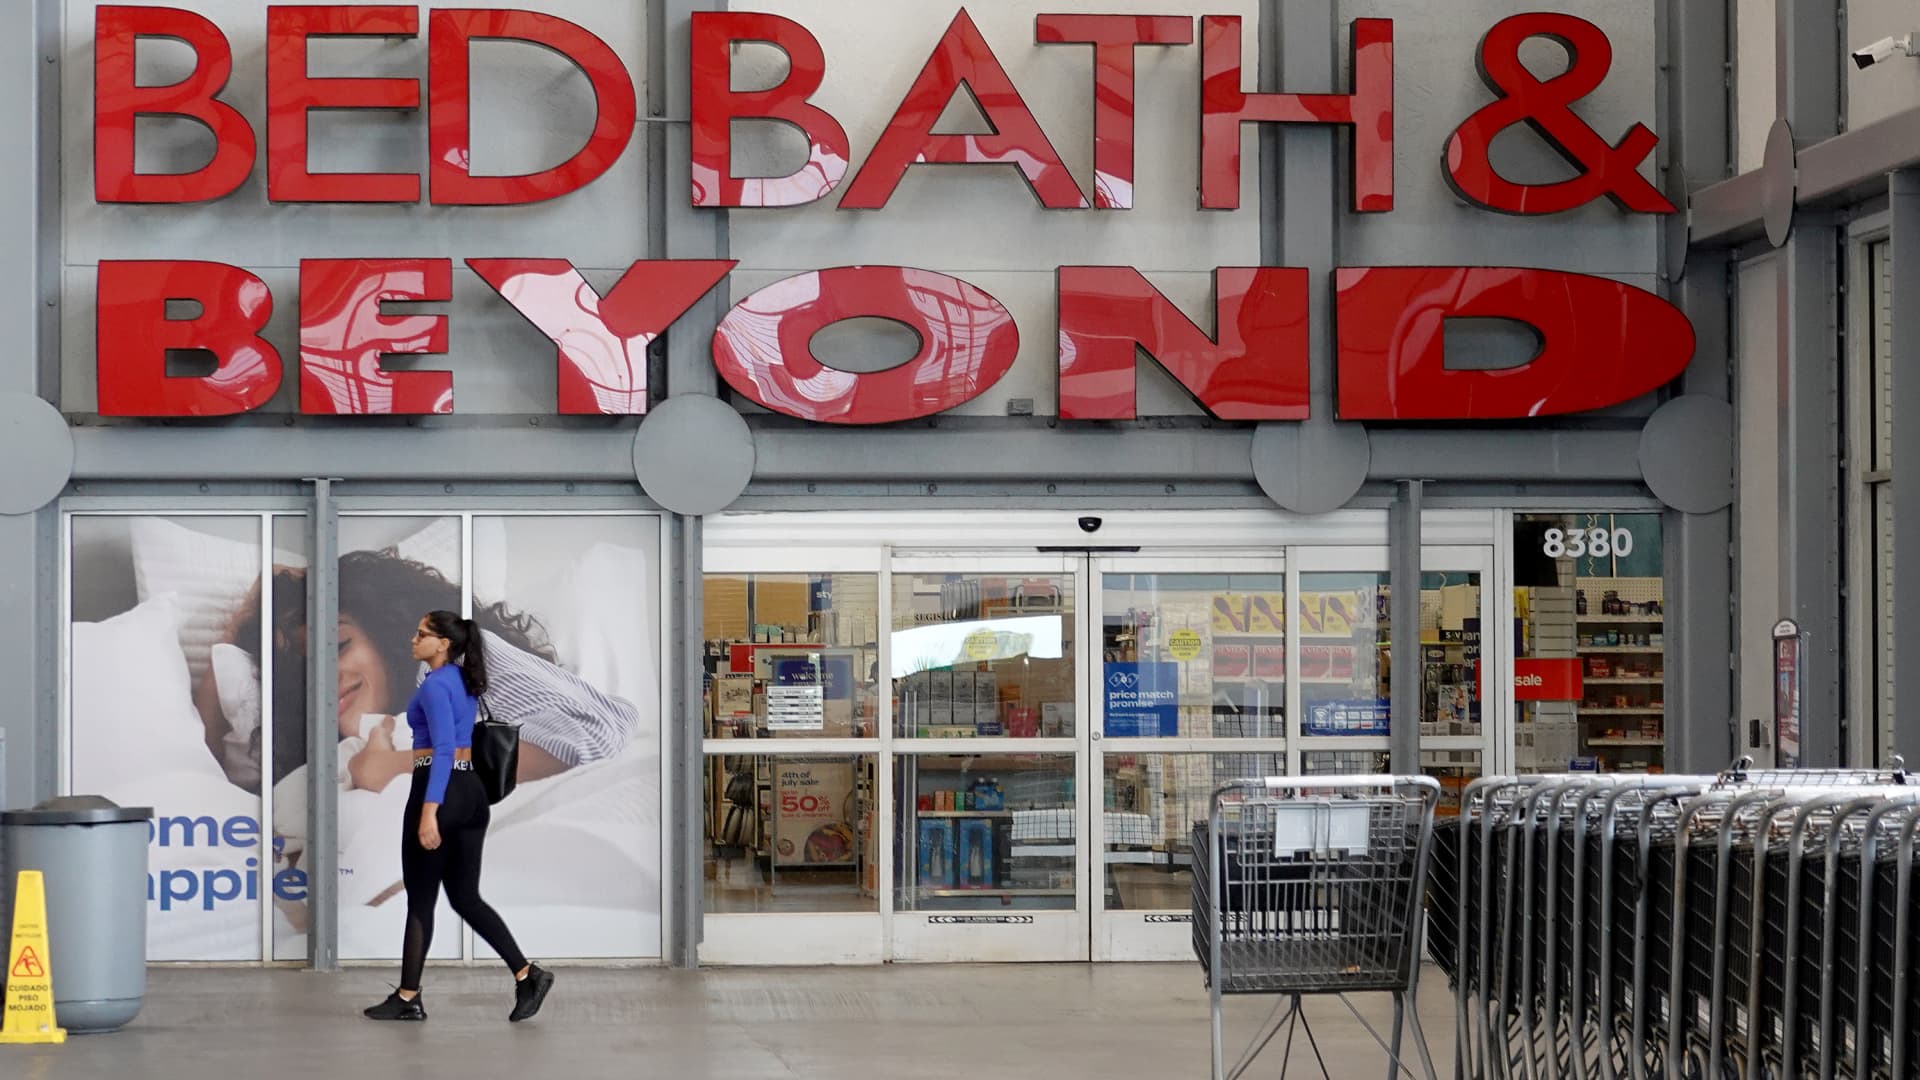 Bed Bath & Beyond announces store closures layoffs and new financing in push to fix struggling business – CNBC